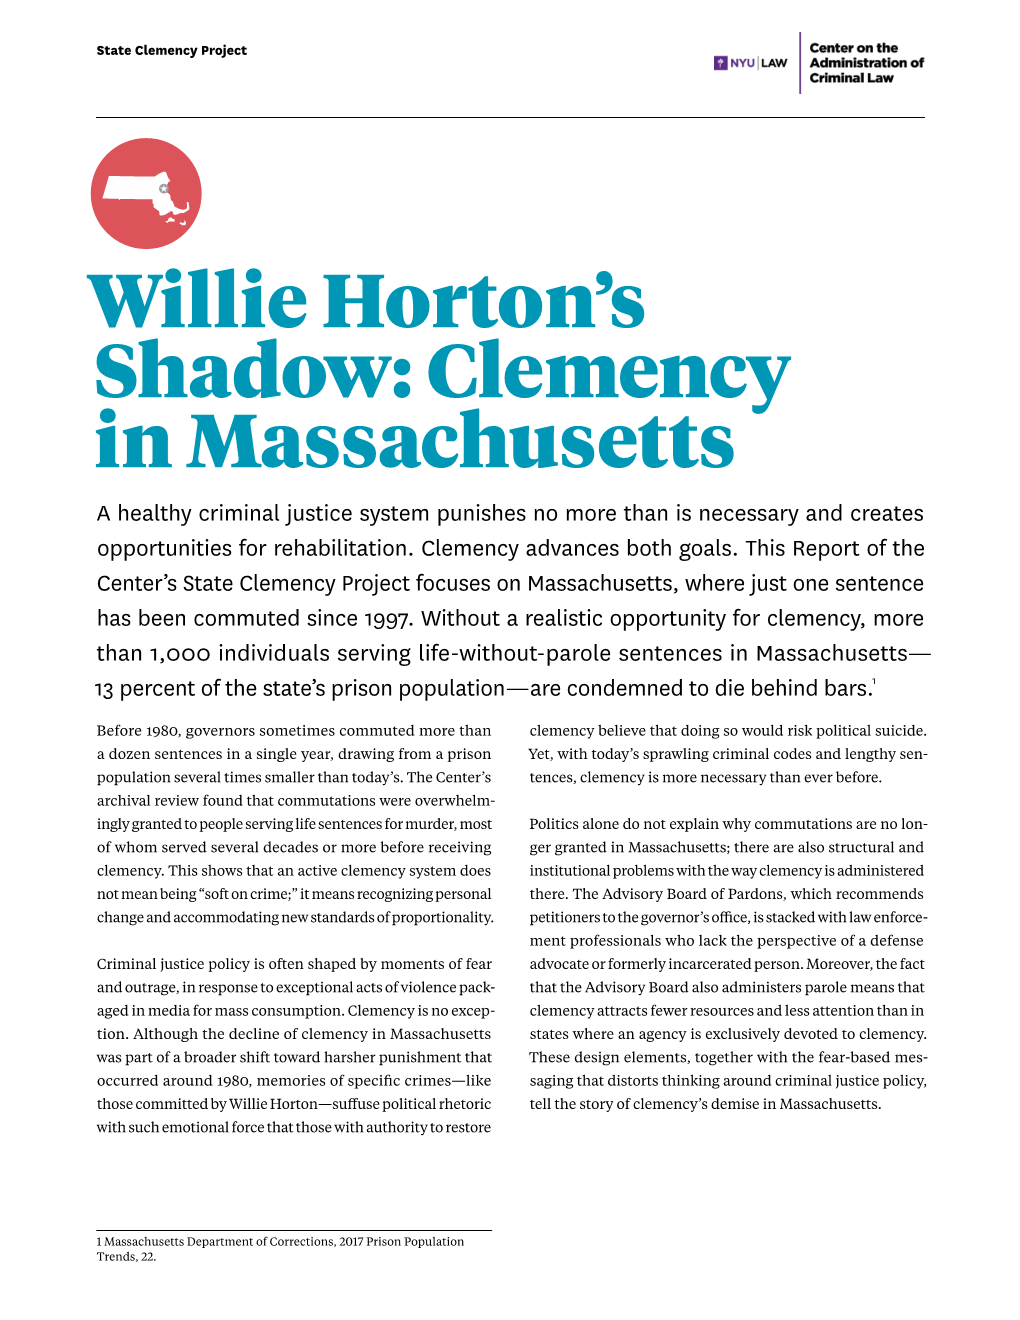 Clemency in Massachusetts a Healthy Criminal Justice System Punishes No More Than Is Necessary and Creates Opportunities for Rehabilitation